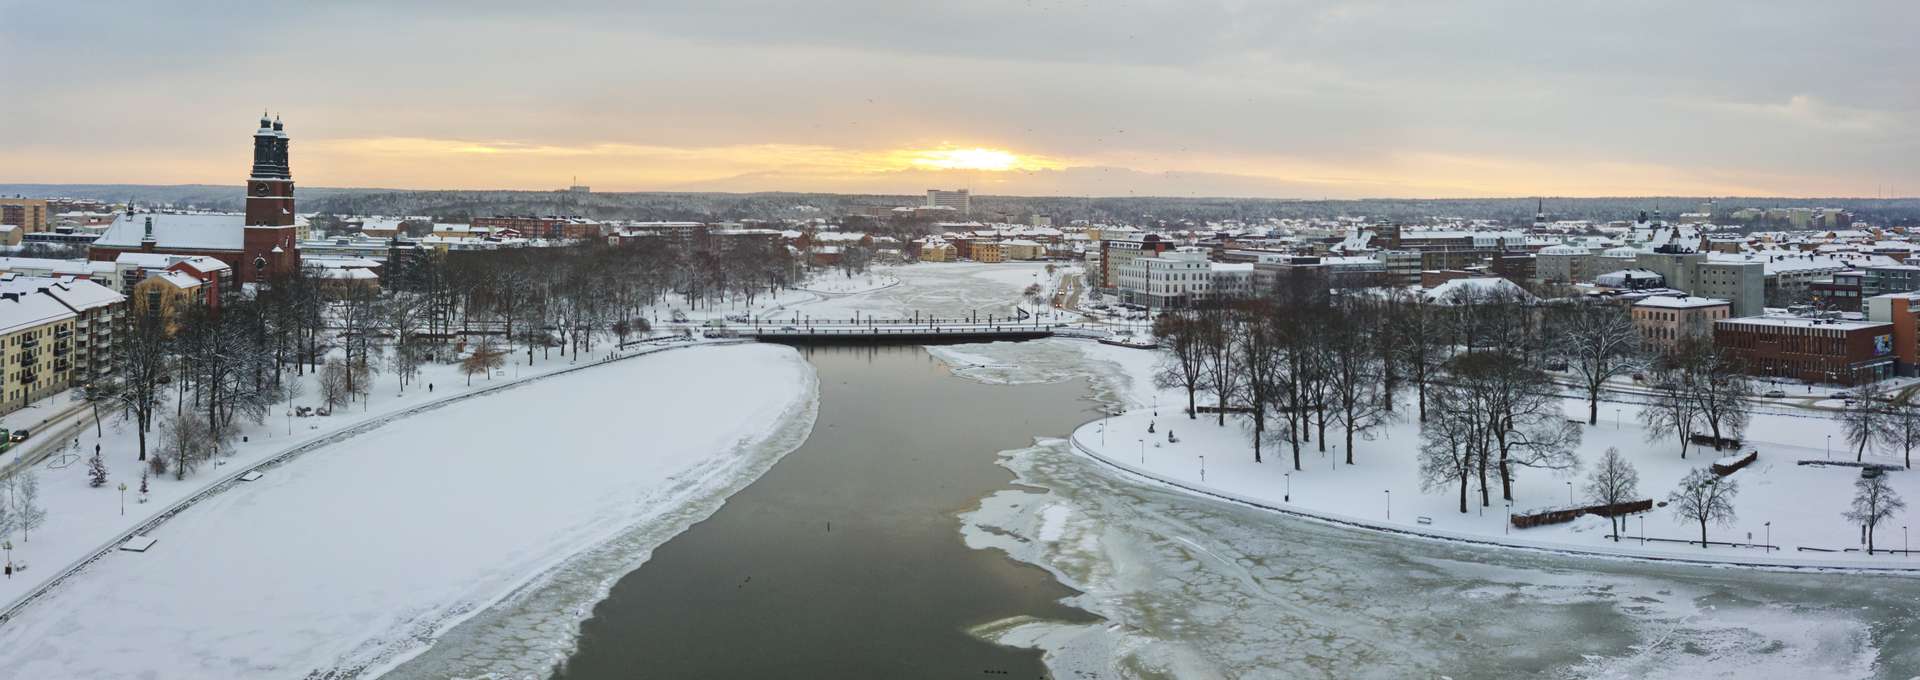 A view of Eskilstuna during the winter